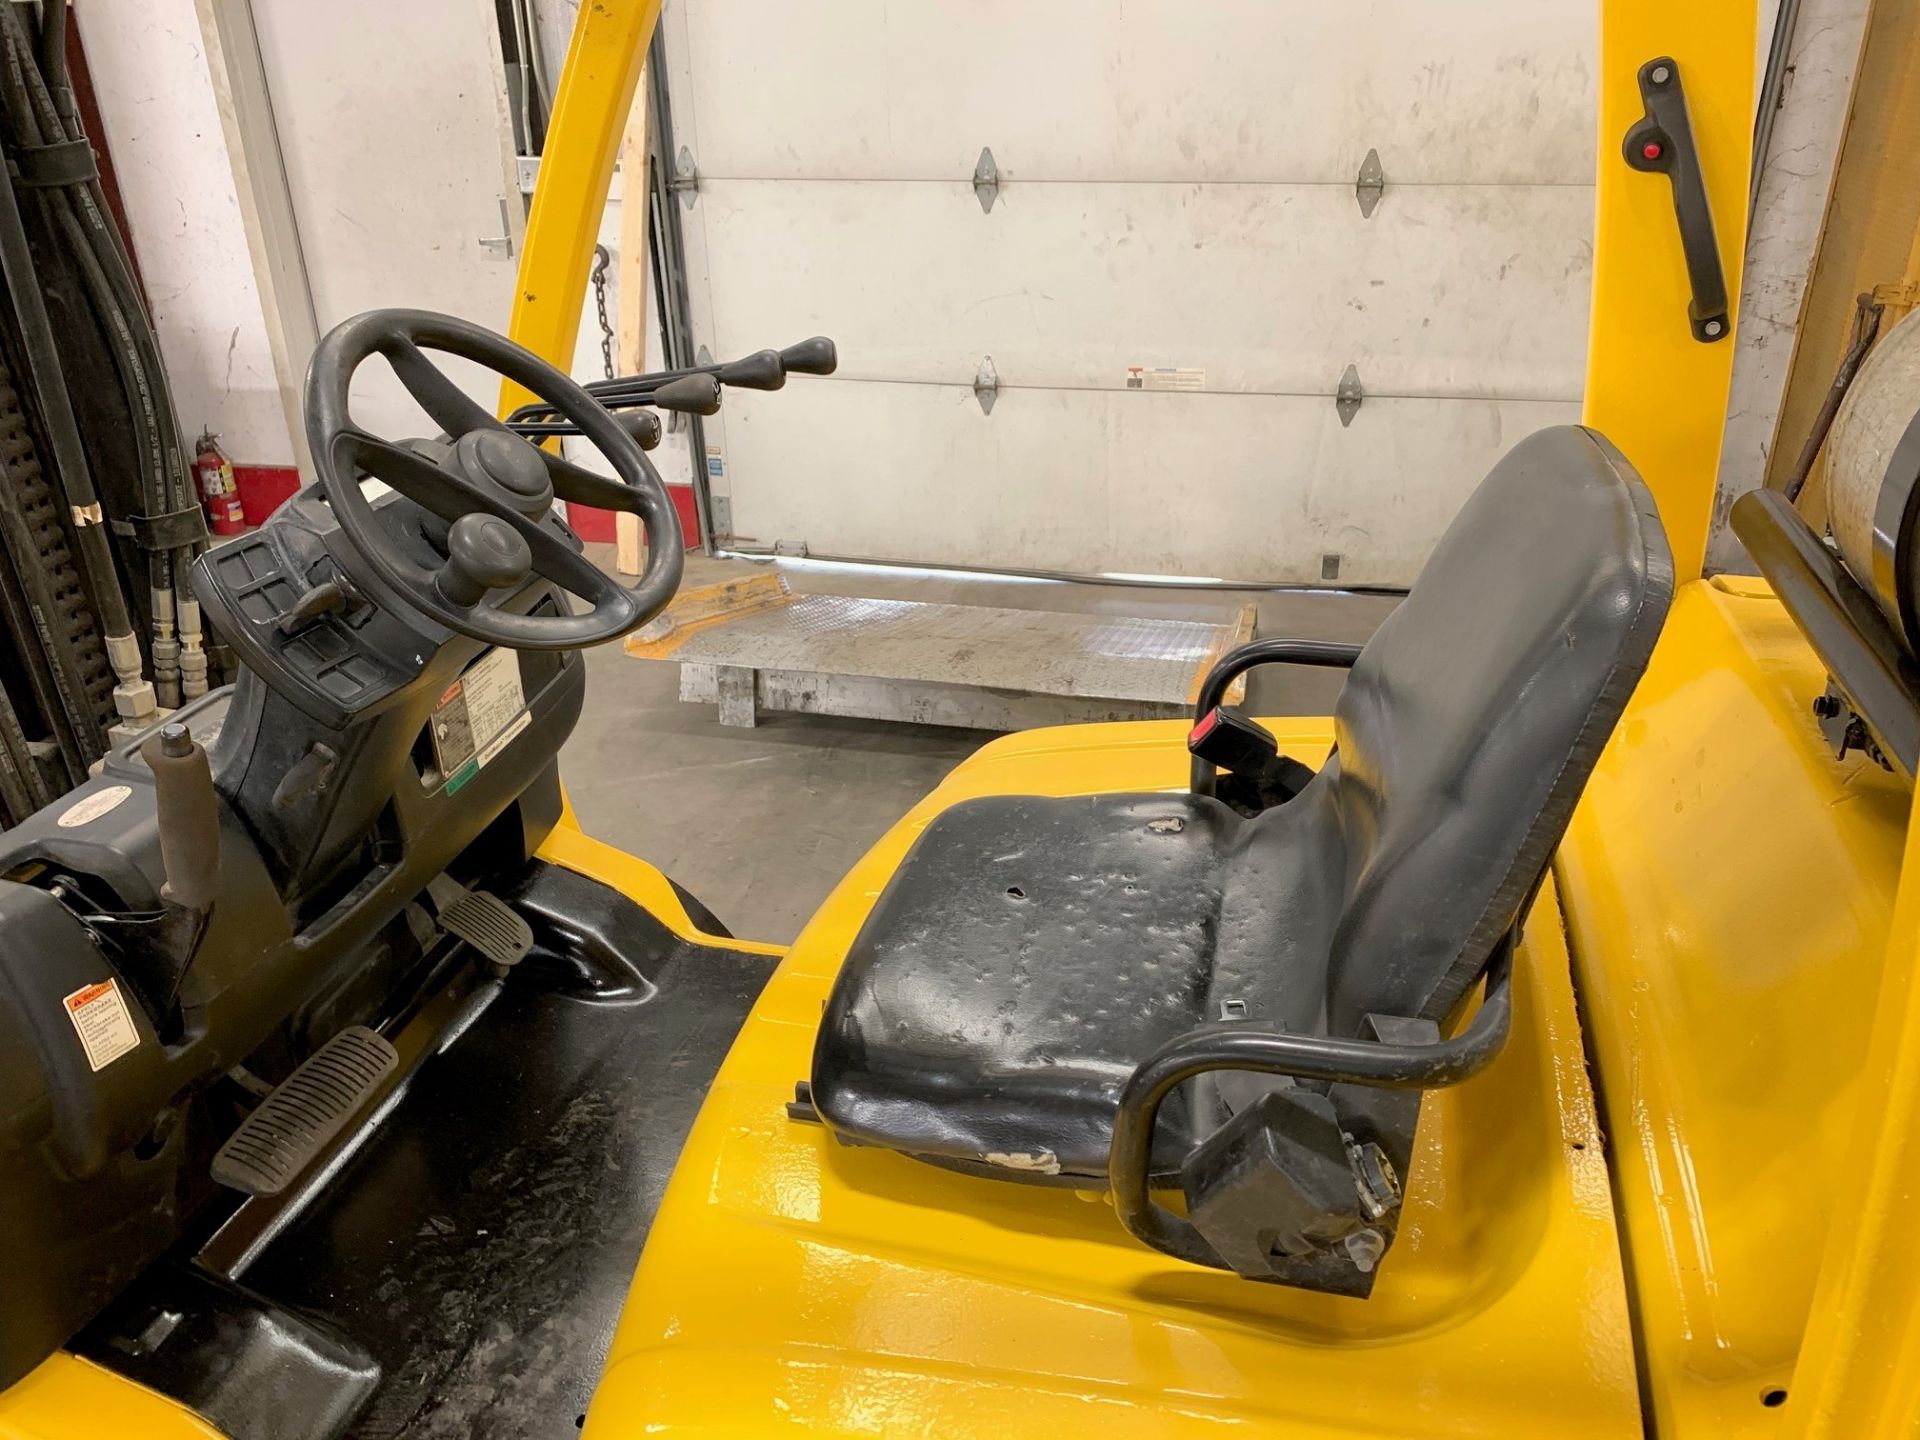 2008 HYSTER 12,000 LB., MODEL: S120FT, S/N: G004V01999E, LPG, LEVER SHIFT, SOLID NON-MARKING - Image 5 of 6